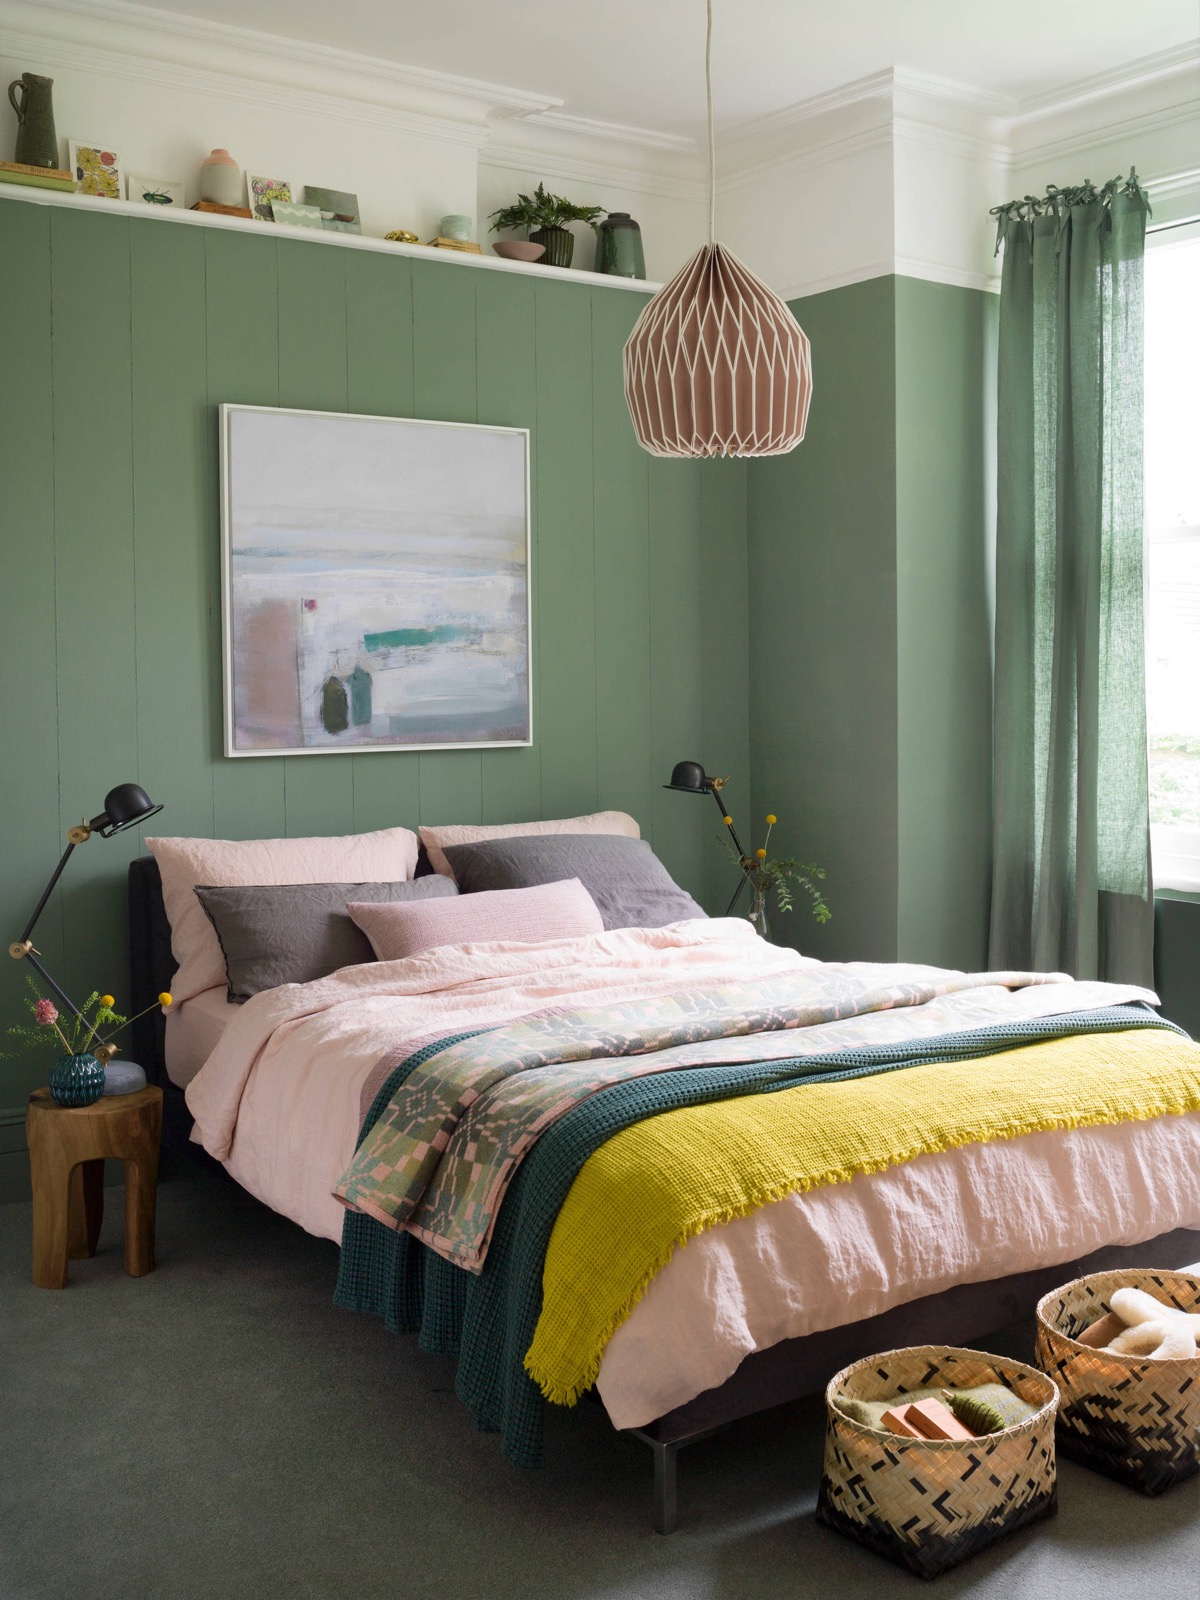 Light Green Walls With Wood Furniture